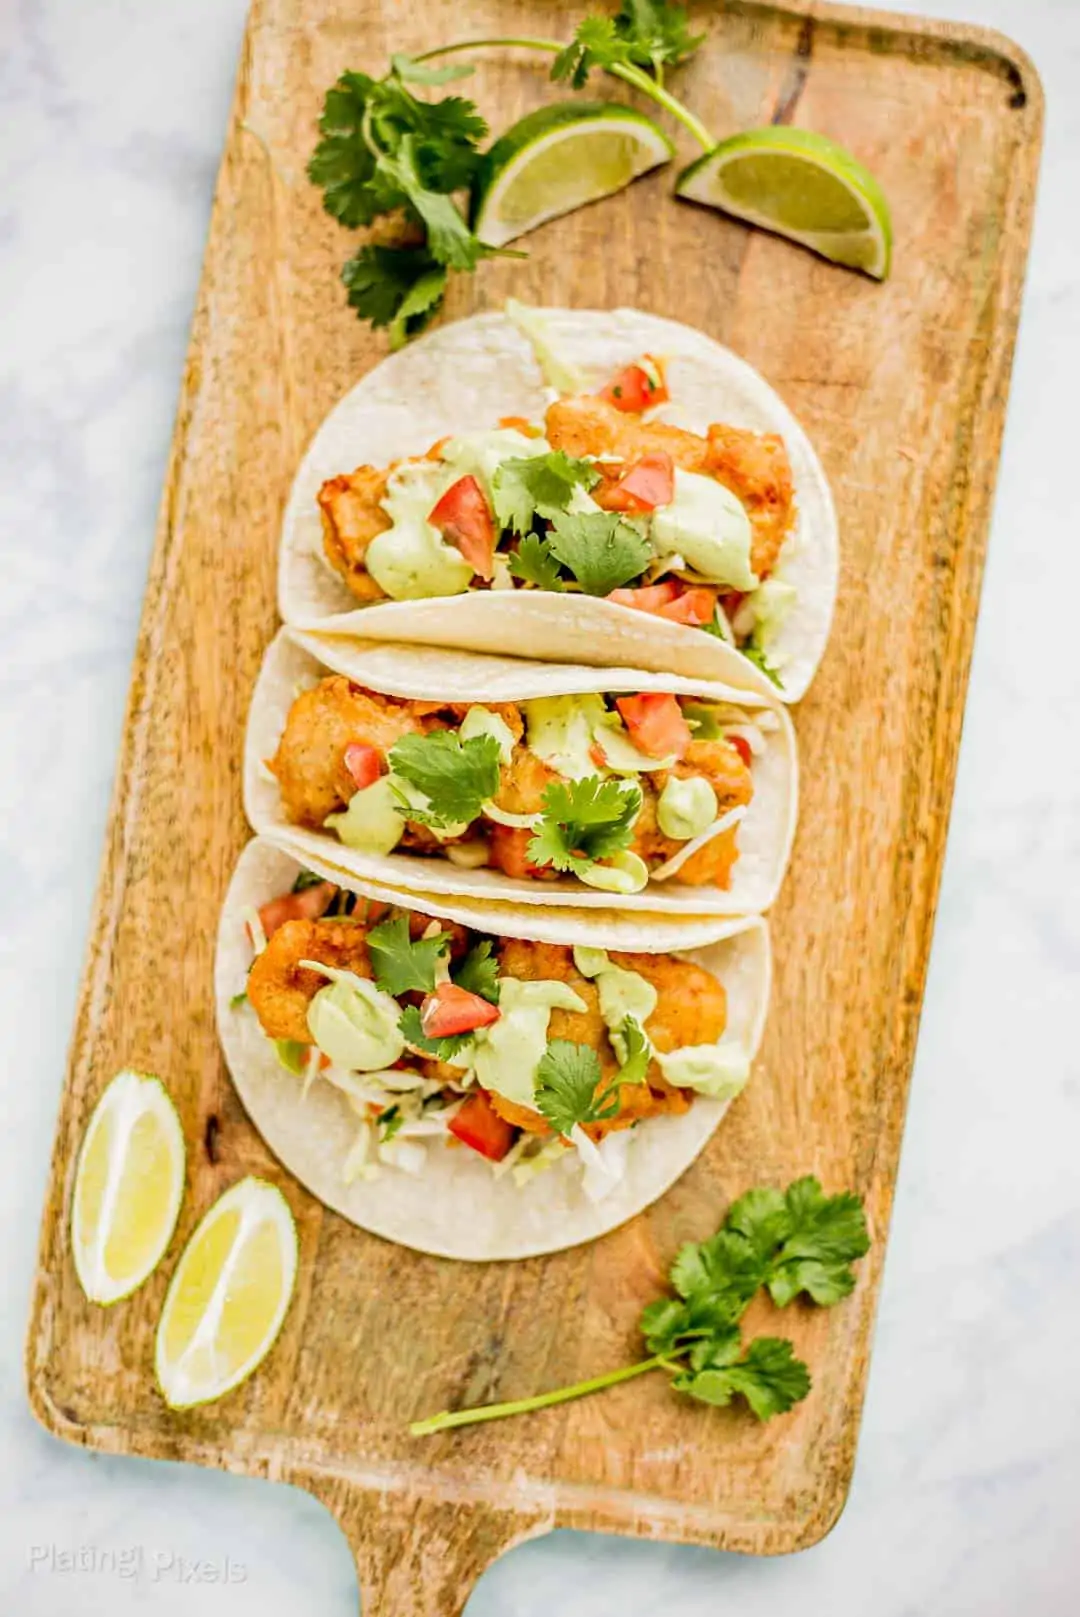 Beer Battered Fish Tacos (Authentic Baja-Style)